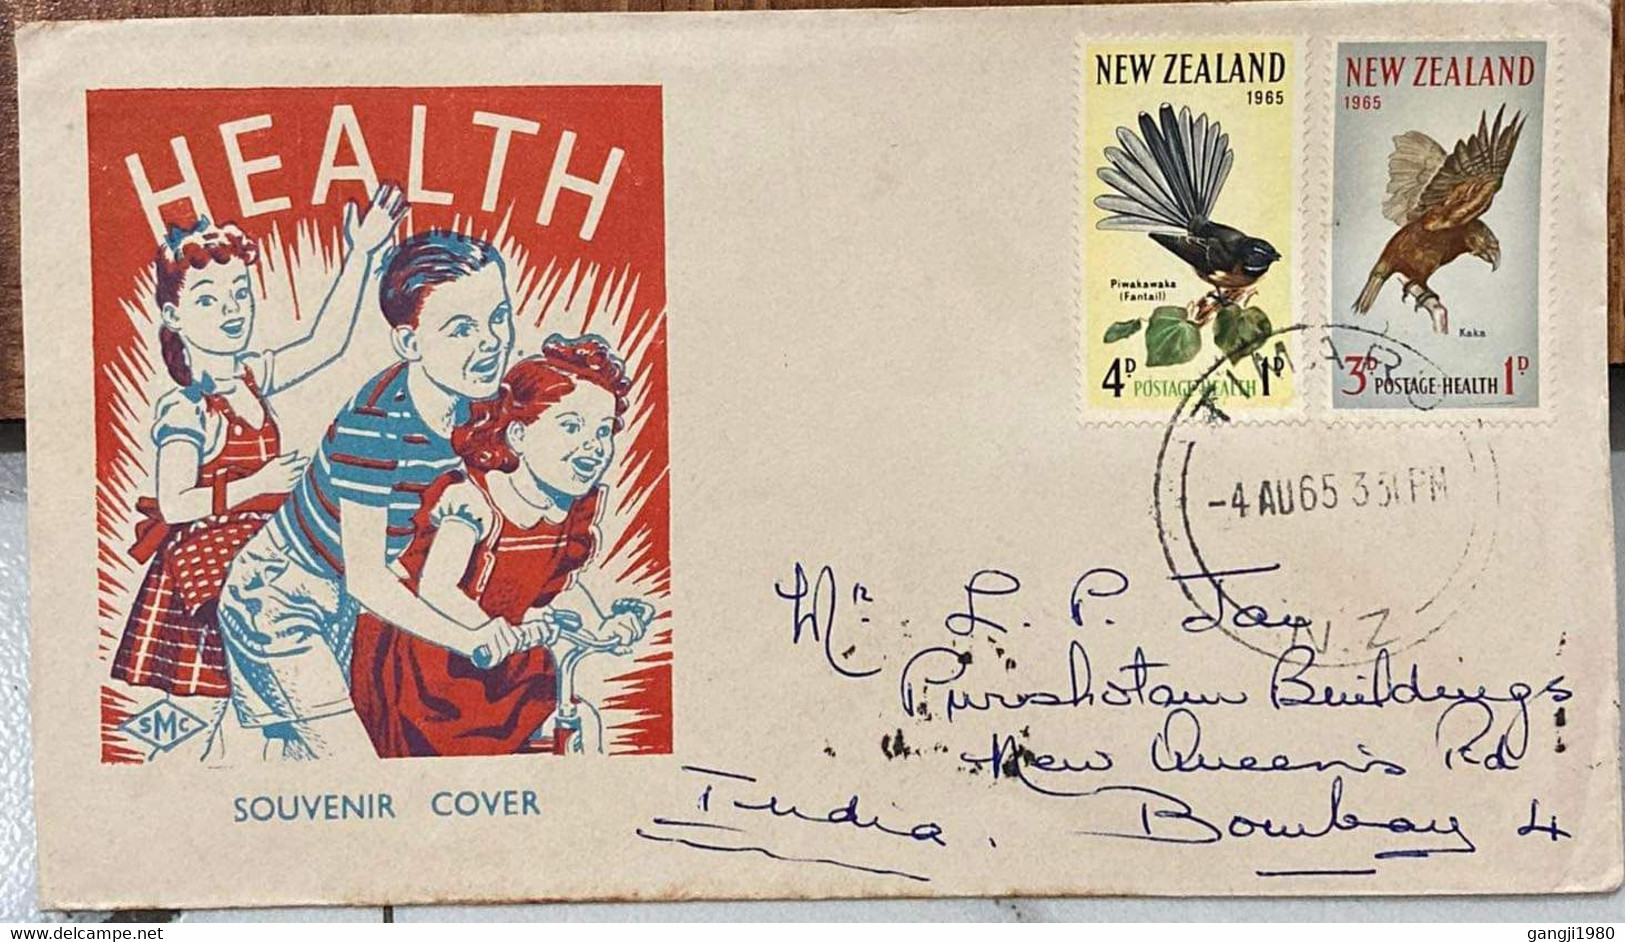 NEW ZEALAND,1965, Health, PRIVATE FDC ,TO ,INDIA,TO ADDRESS, L.P.JAI ,CRICKETER,CRICKET,Timaro,POST MARK. - Lettres & Documents